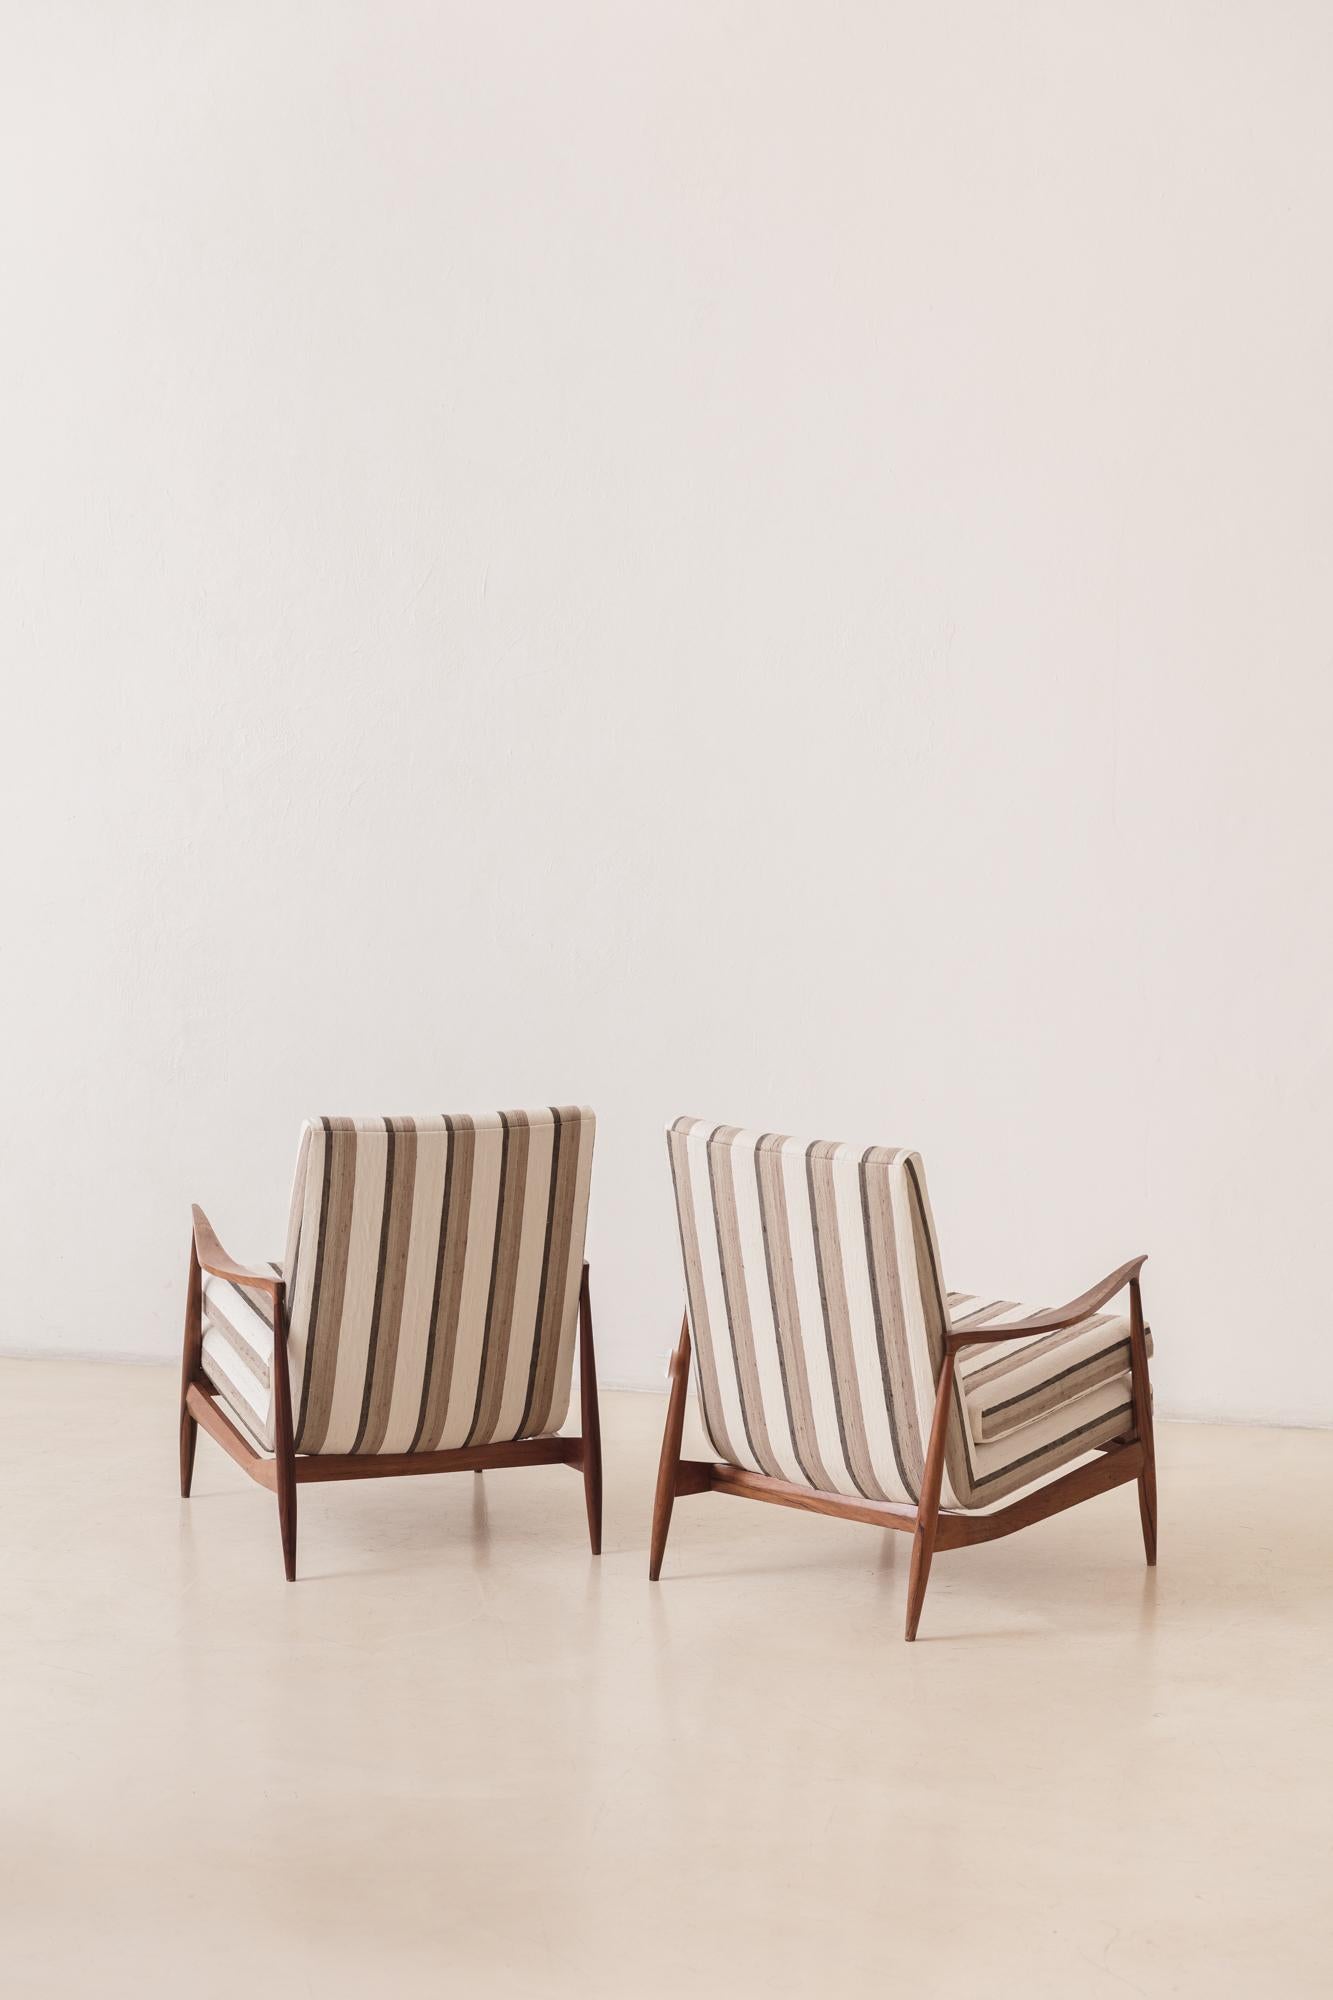 Pair of Vintage Armchairs by Móveis Cimo, 1960s, Brazilian Mid-Century In Good Condition For Sale In New York, NY